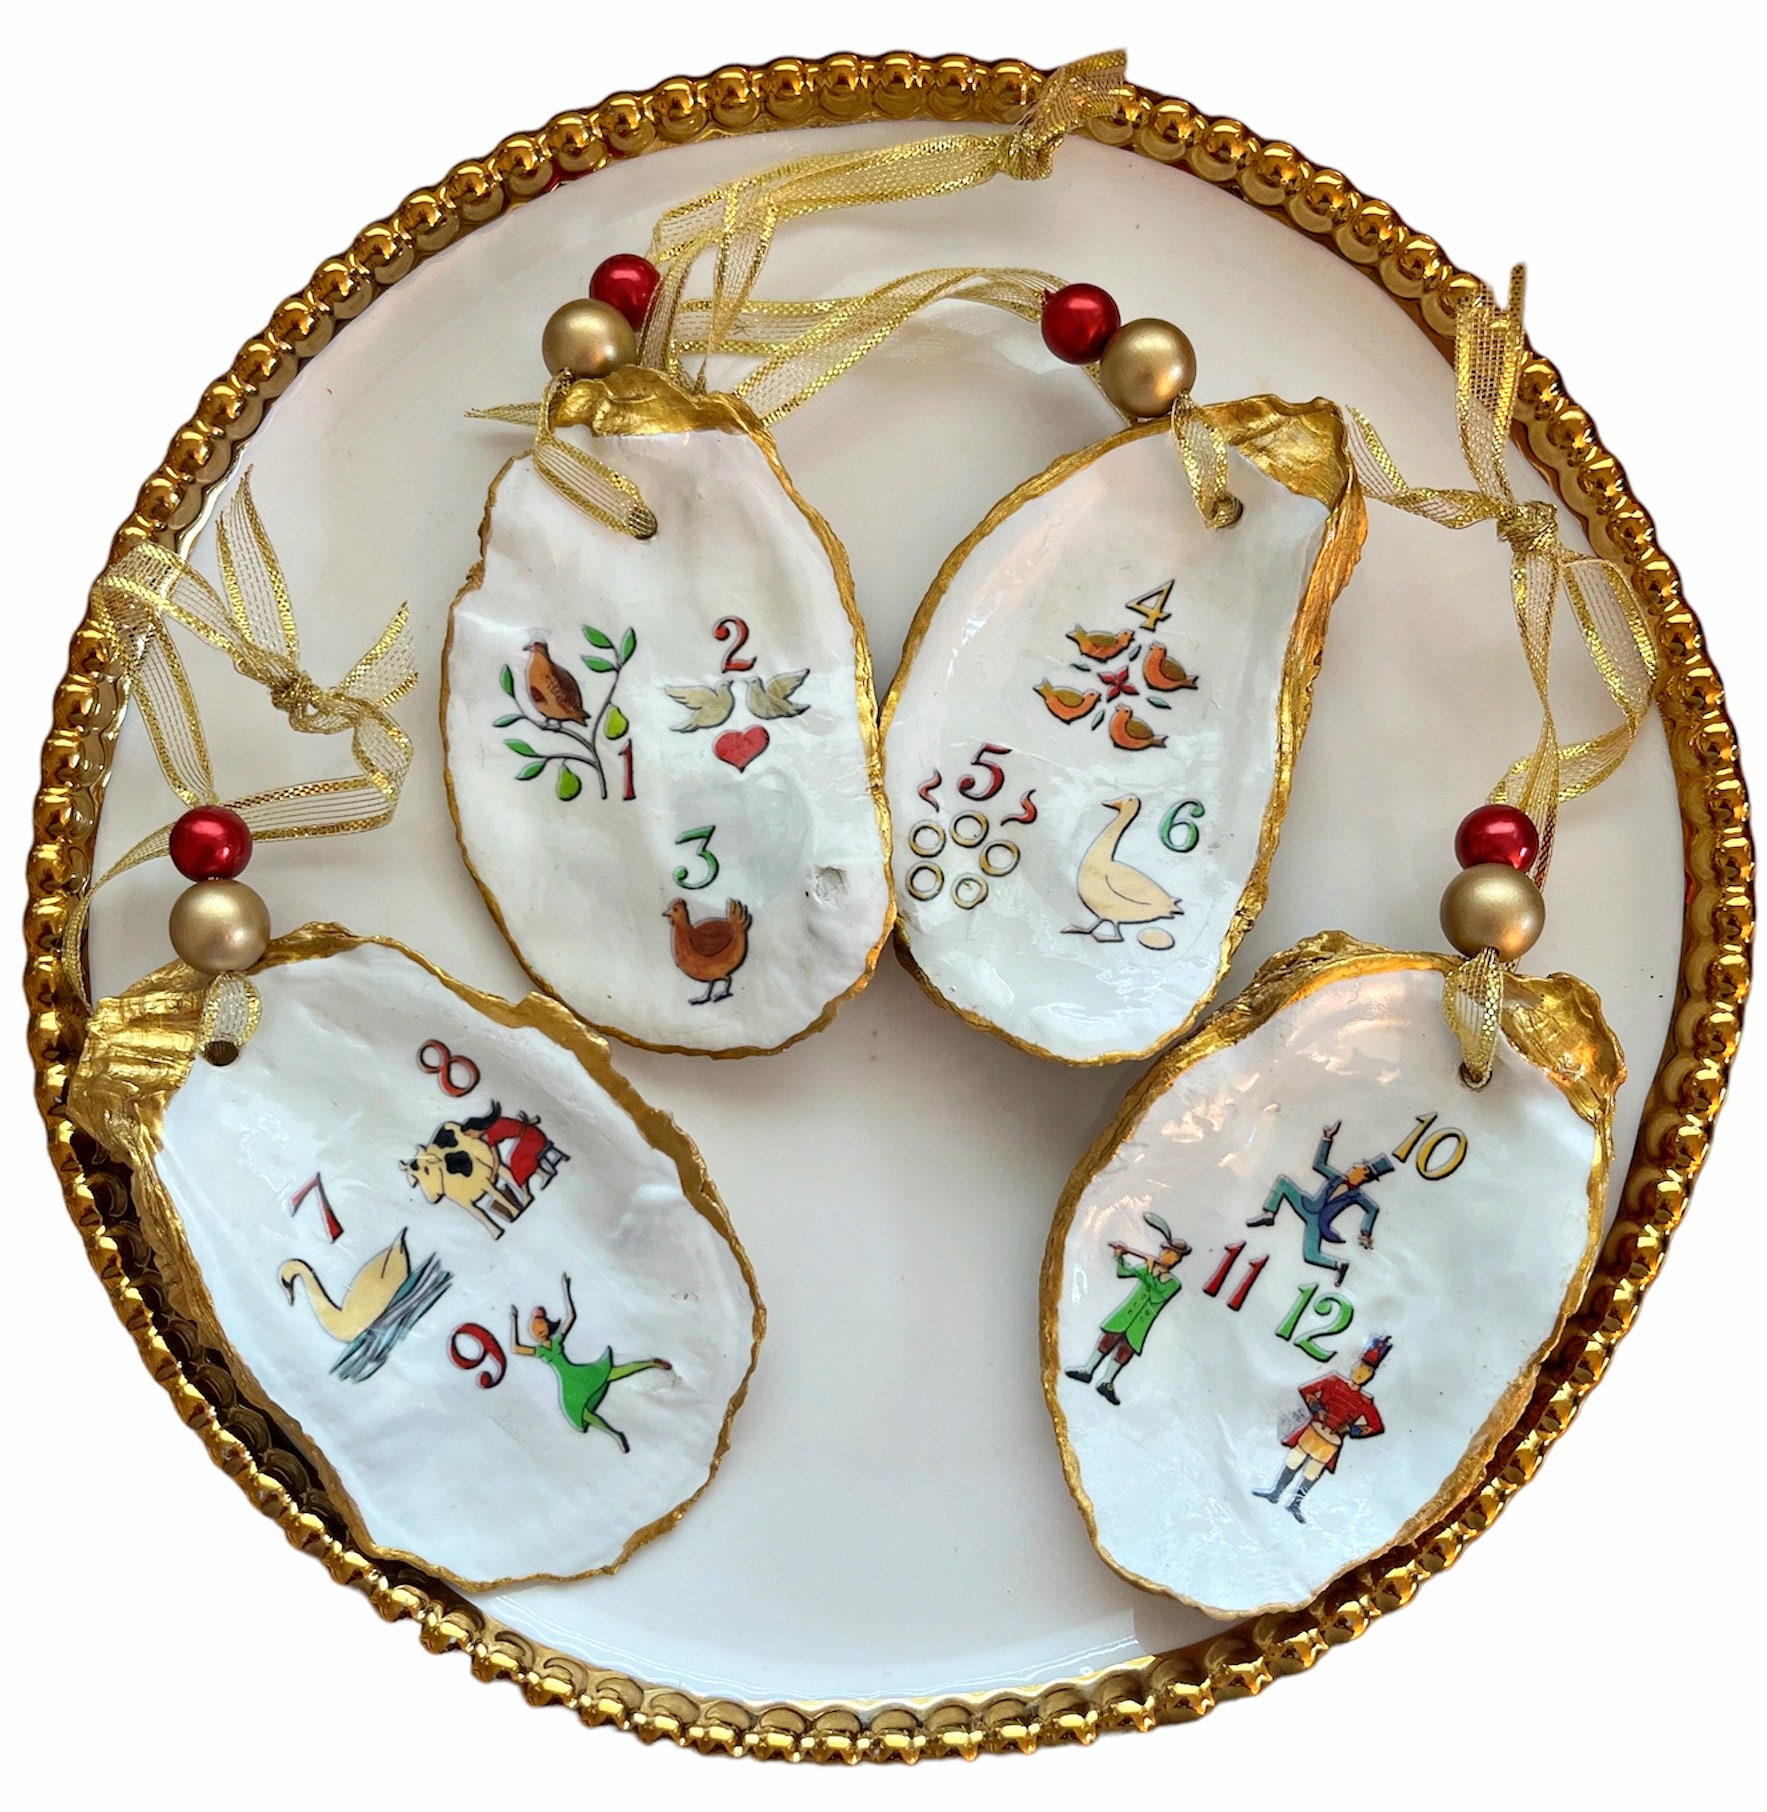 12 Days of Christmas Ring Dishes/ornaments-decoupage Oyster Shell Ring  Holder, Christmas Ornaments, Christmas Gift, Holiday Gift, Ring Dish 